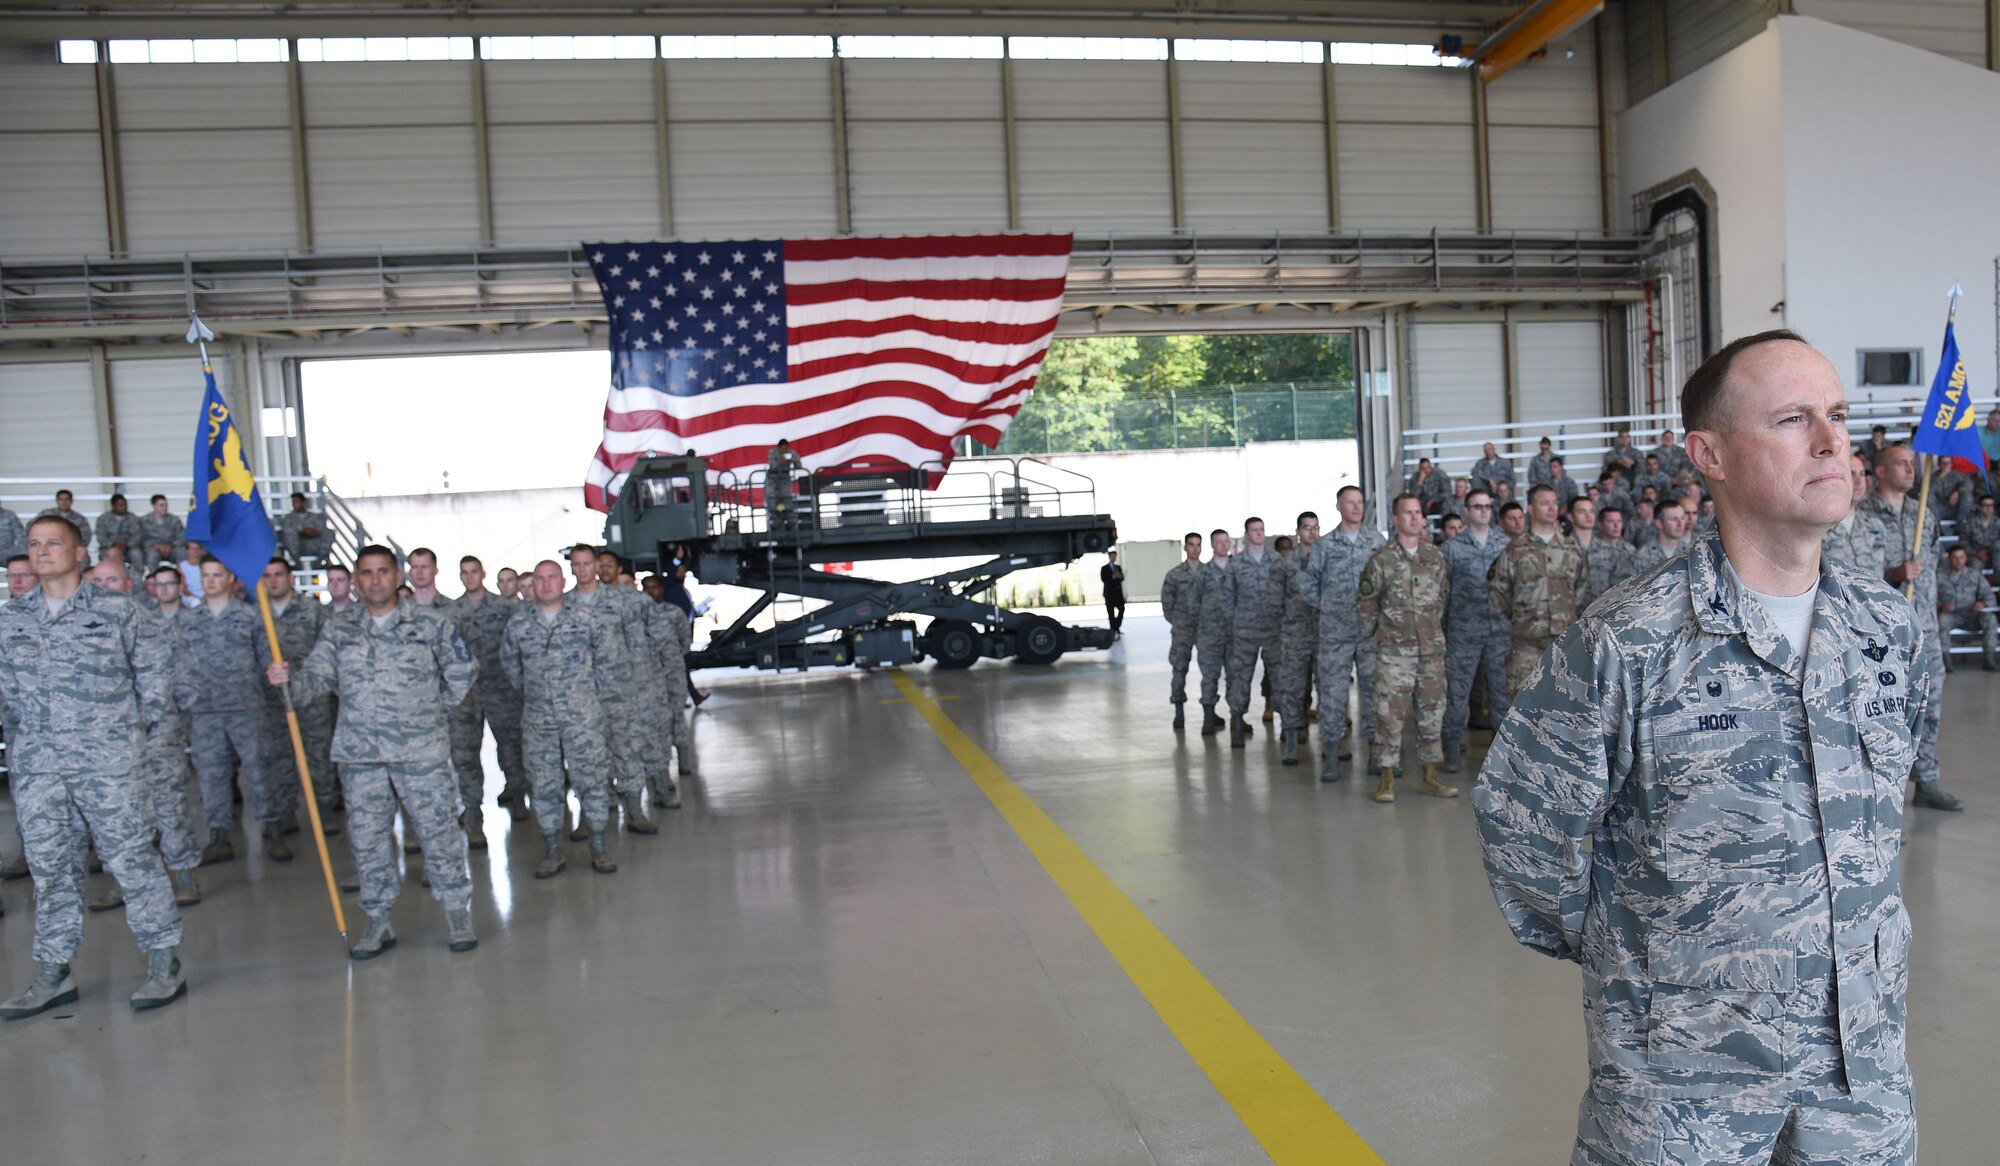 Col. Bradley L. Spears assumed command of the 521st Air Mobility Operation Wing during a change of command ceremony at Ramstein Air Base, Germany, June 28. Maj. Gen. Christopher Bence, U.S. Air Force Expeditionary Center commander, presided over the ceremony in which Col. Cooper relinquished command of the 521st AMOW to Spears.